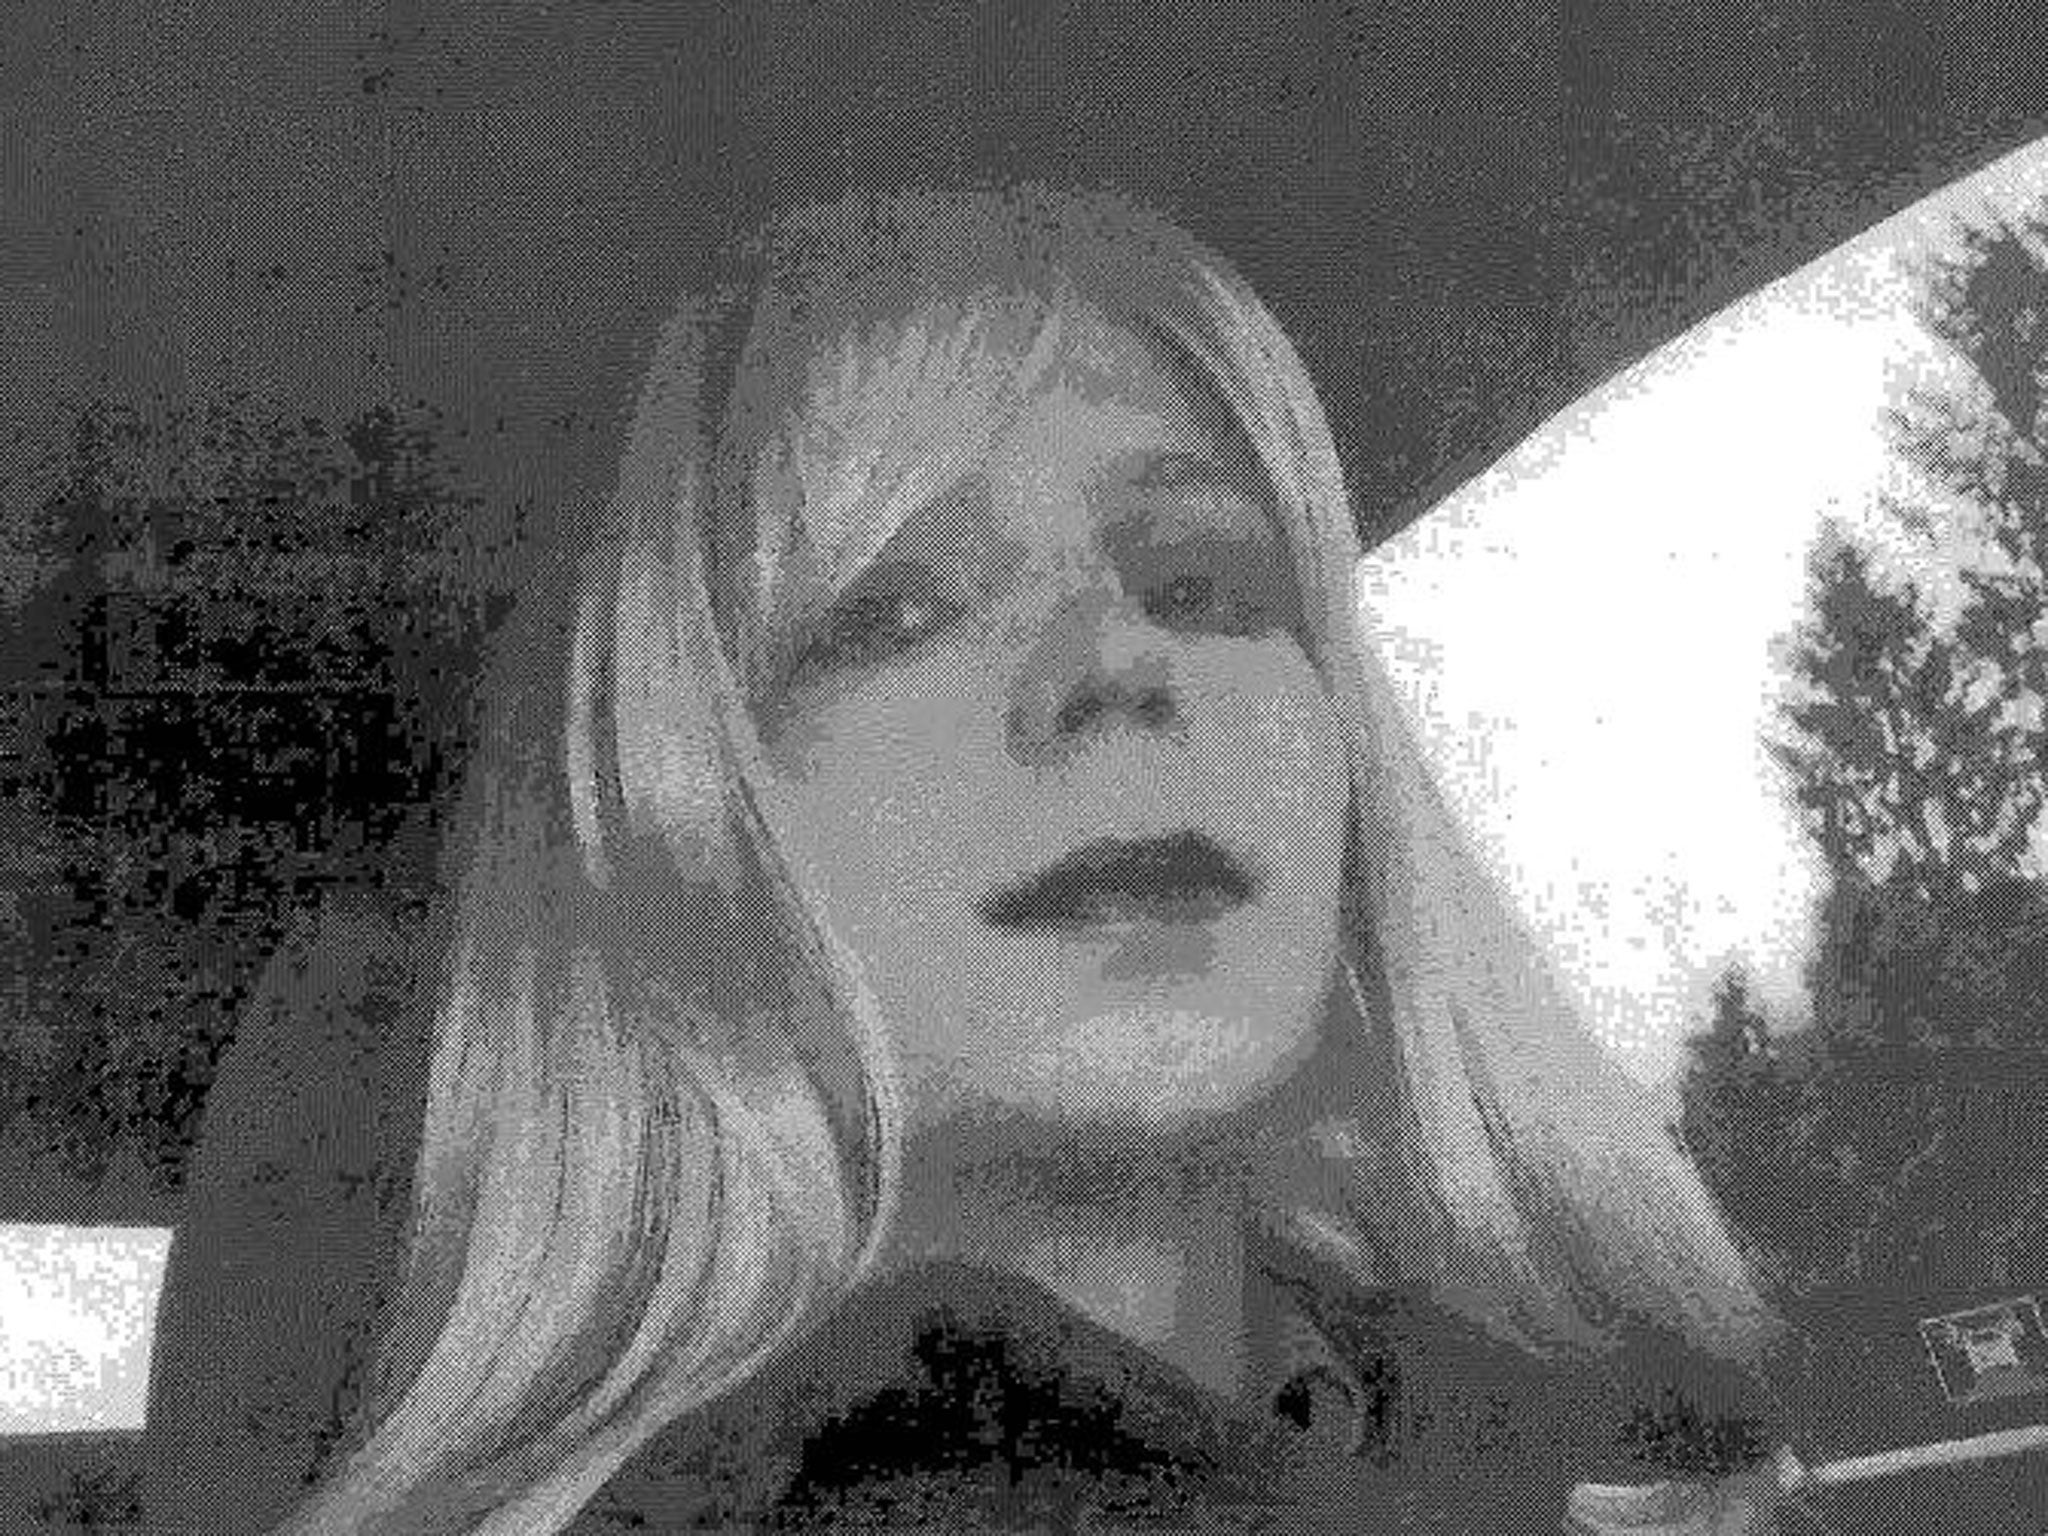 Bradley Manning, now known as Chelsea, was given 35 years in jail